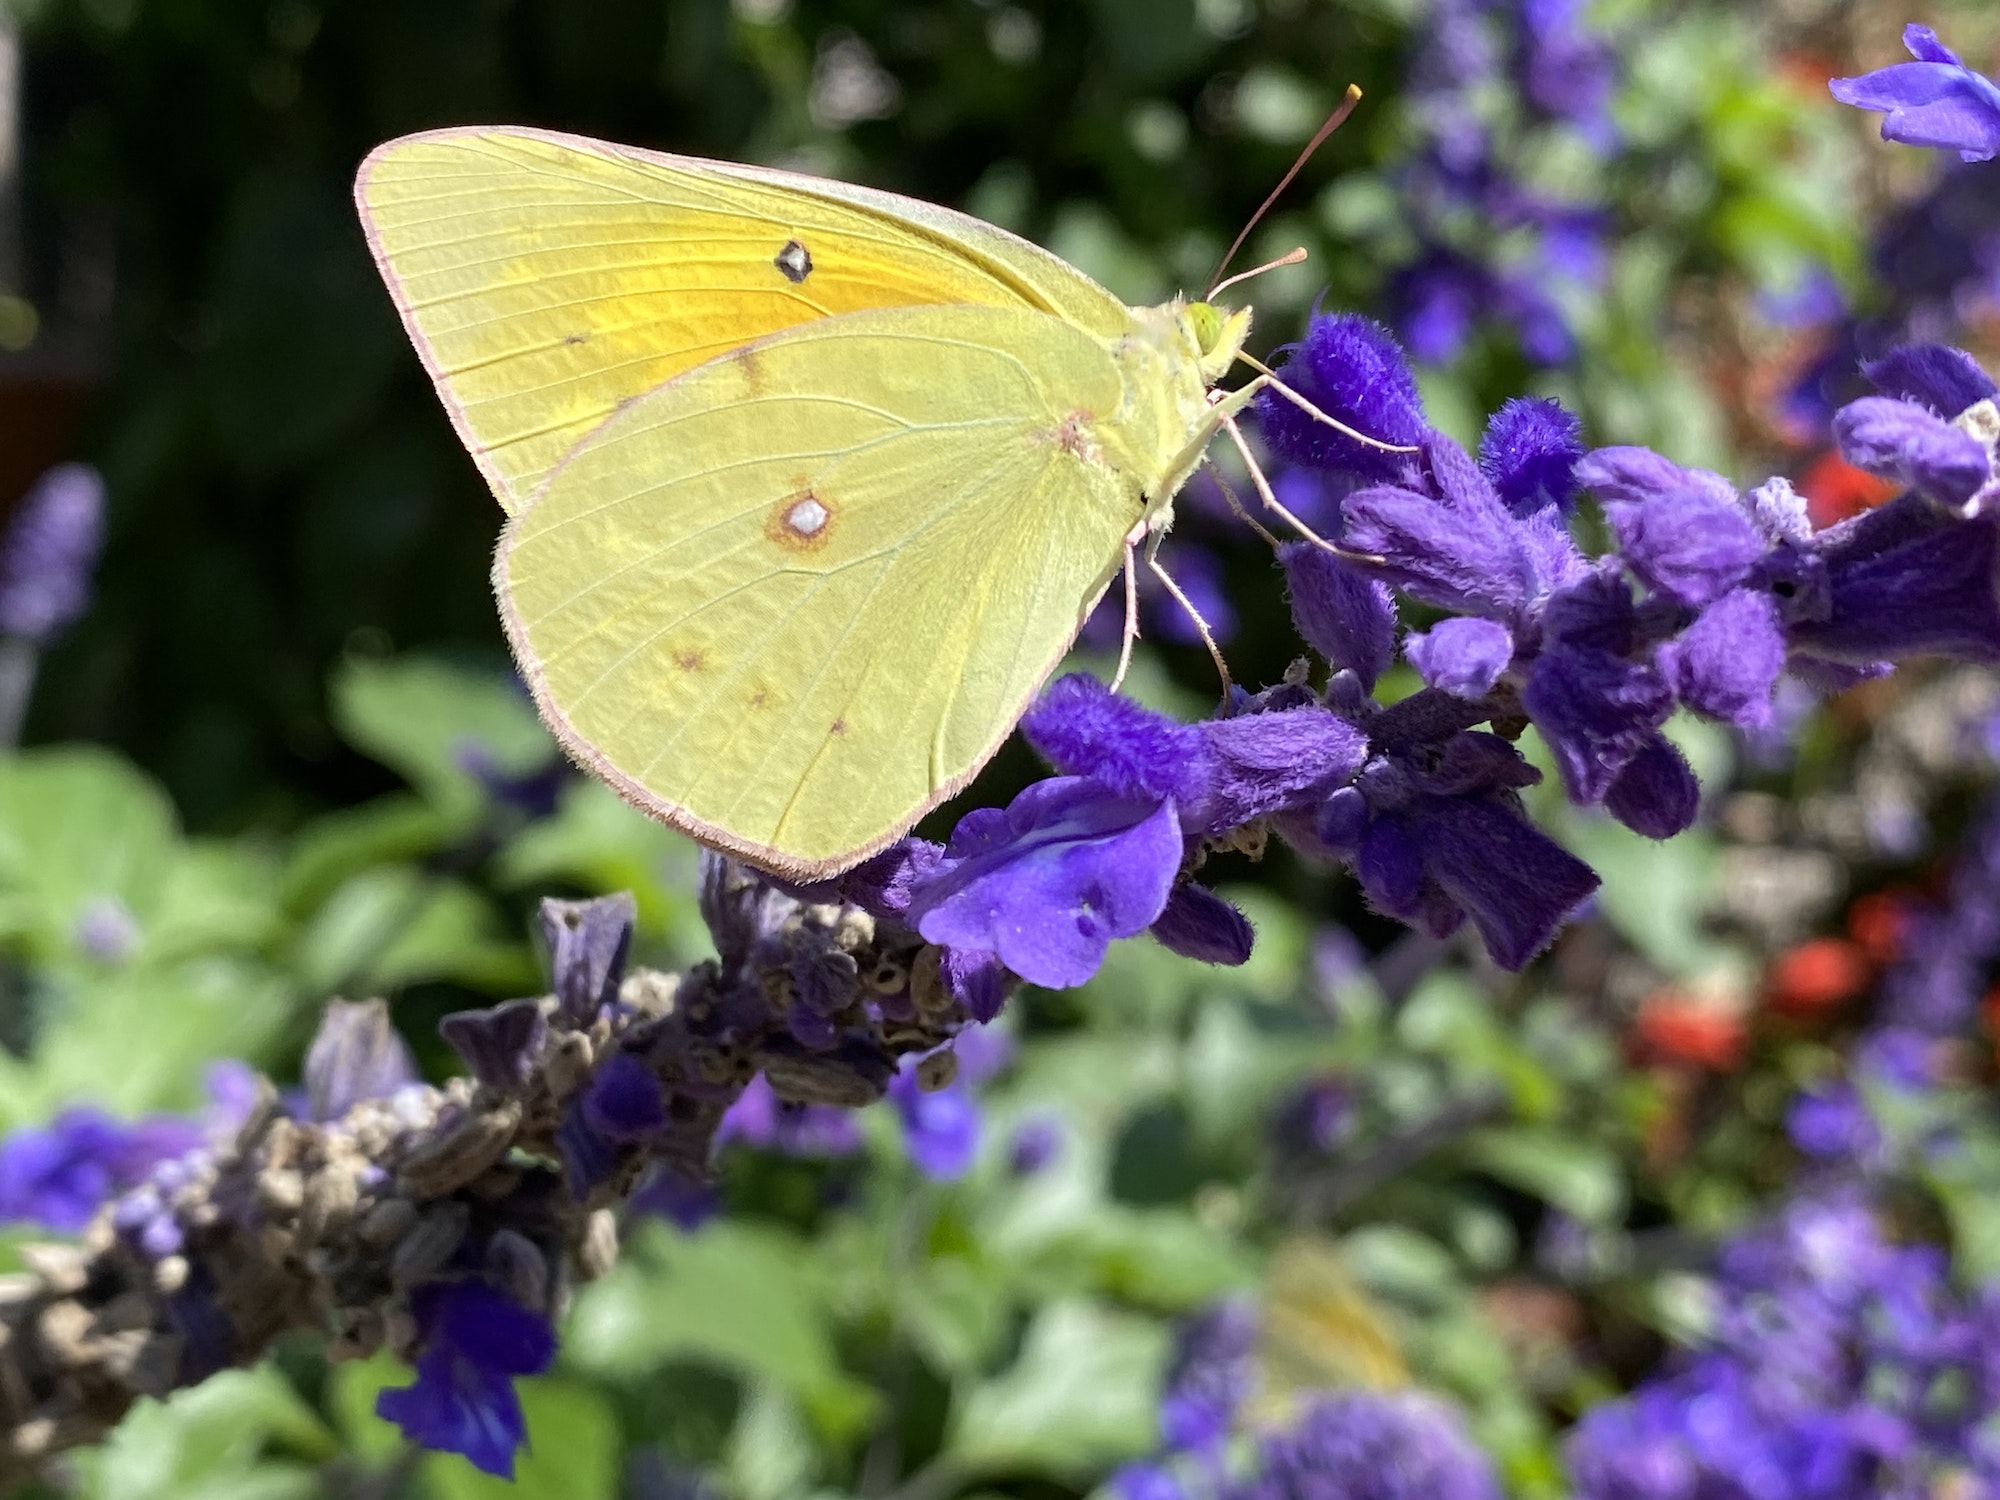 The Best Flowers for Attracting Butterflies and Bees to Your Garden